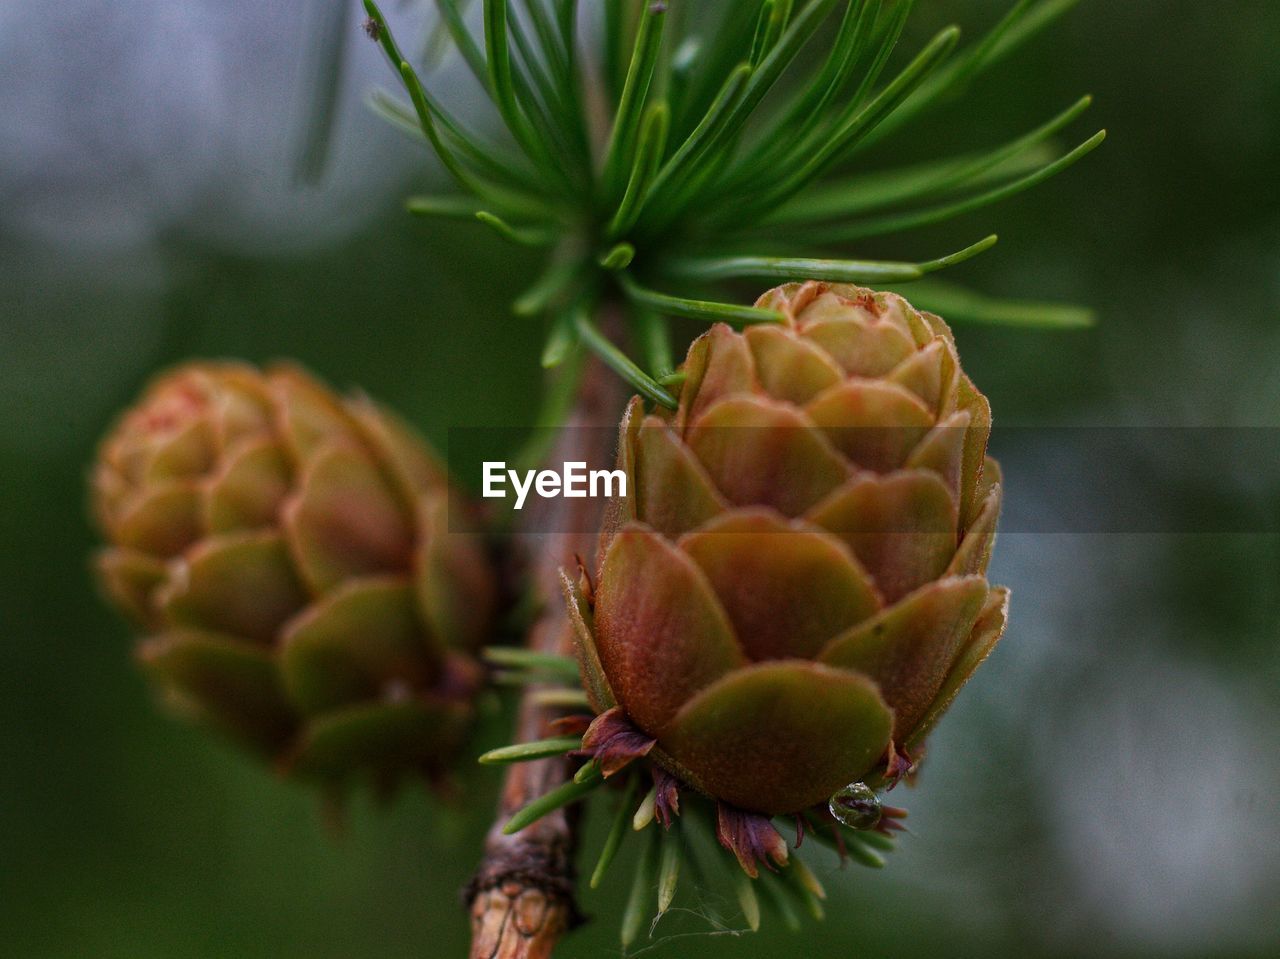 plant, tree, food, food and drink, close-up, flower, healthy eating, fruit, nature, no people, macro photography, freshness, produce, tropical fruit, focus on foreground, growth, beauty in nature, green, leaf, plant part, outdoors, wellbeing, day, bud, branch, pinaceae, coniferous tree, artichoke